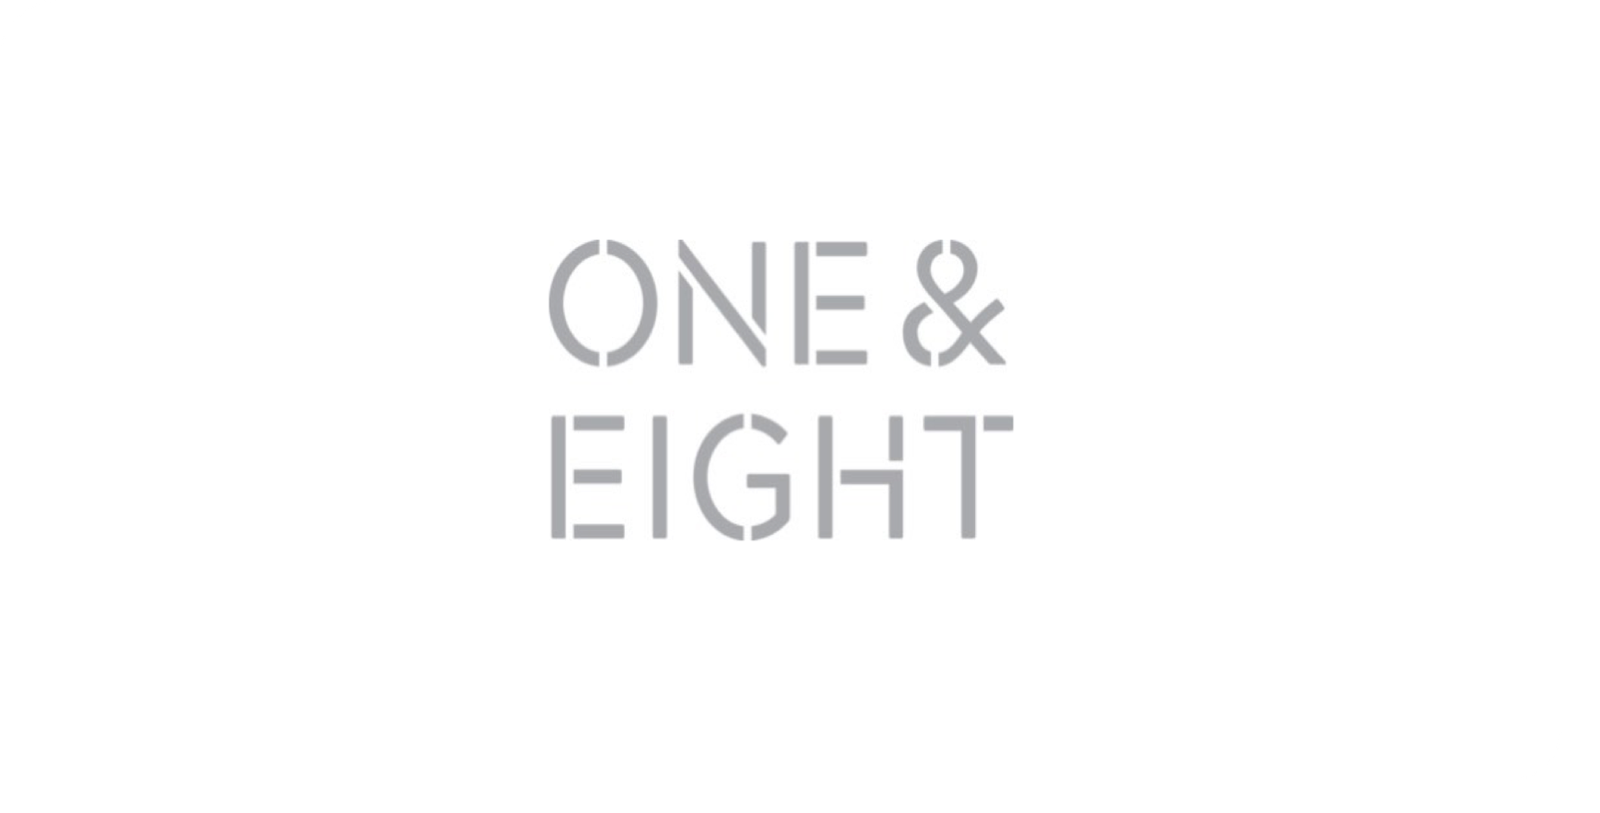 One & Eight